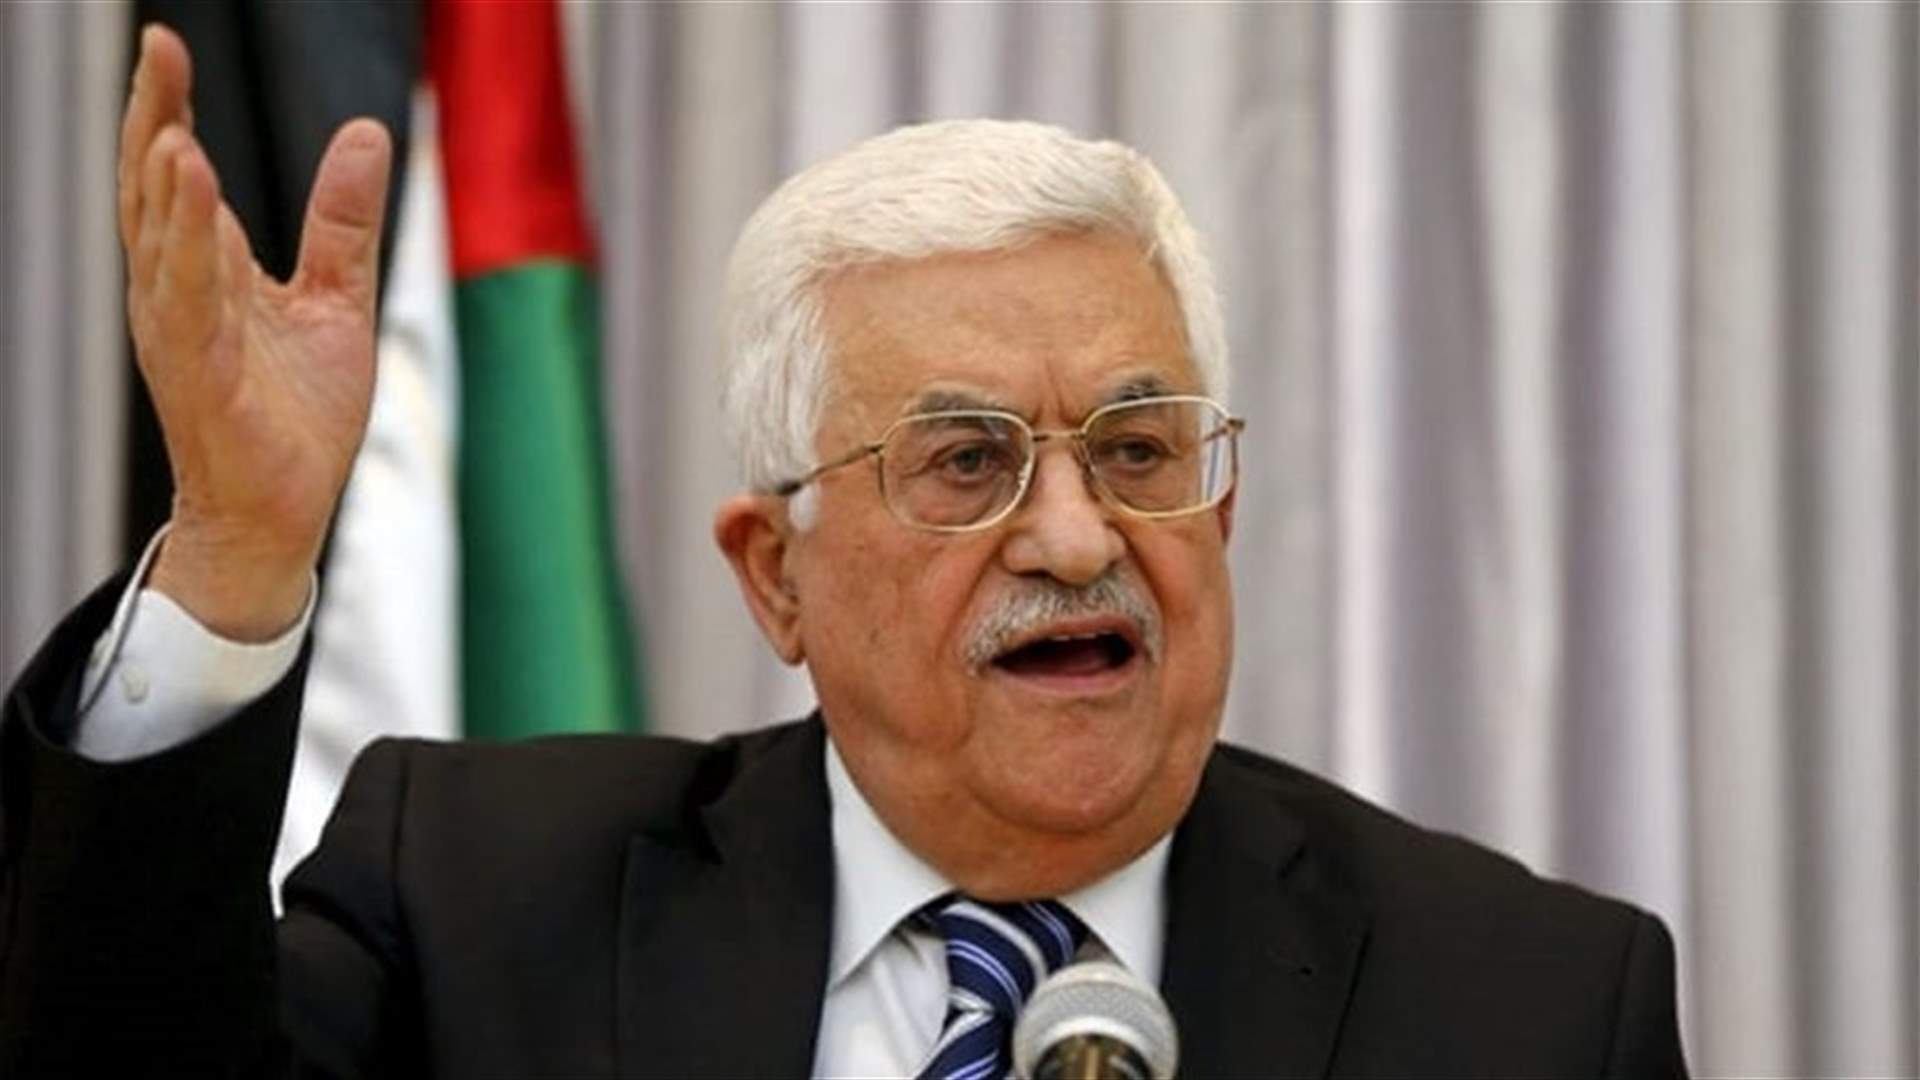 Abbas calls for international Mideast peace conference by mid-2018